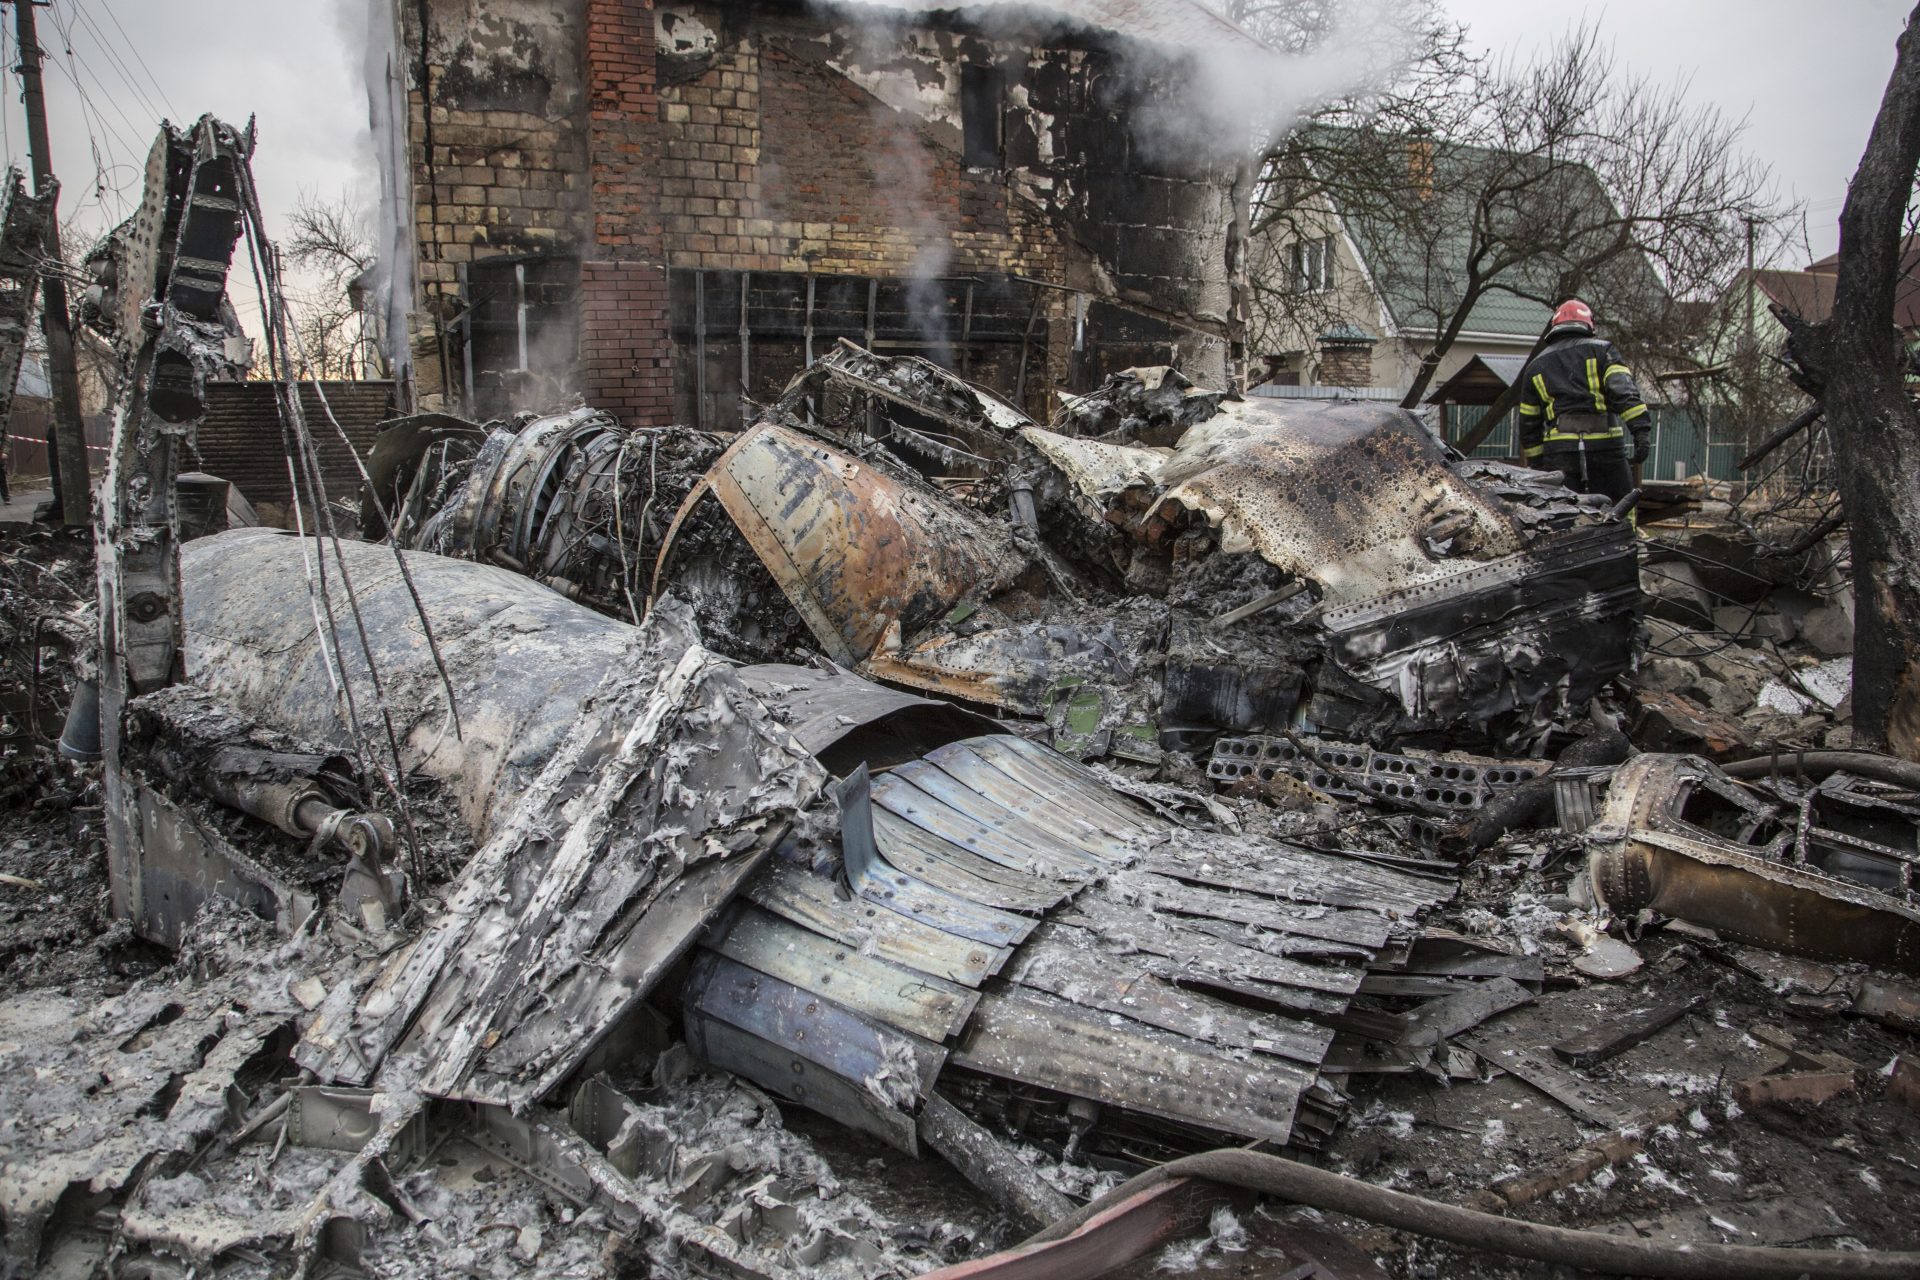 A Ukrainian firefighter walks between at fragments of a downed aircraft seen in in Kyiv, Ukraine, Friday, Feb. 25, 2022.